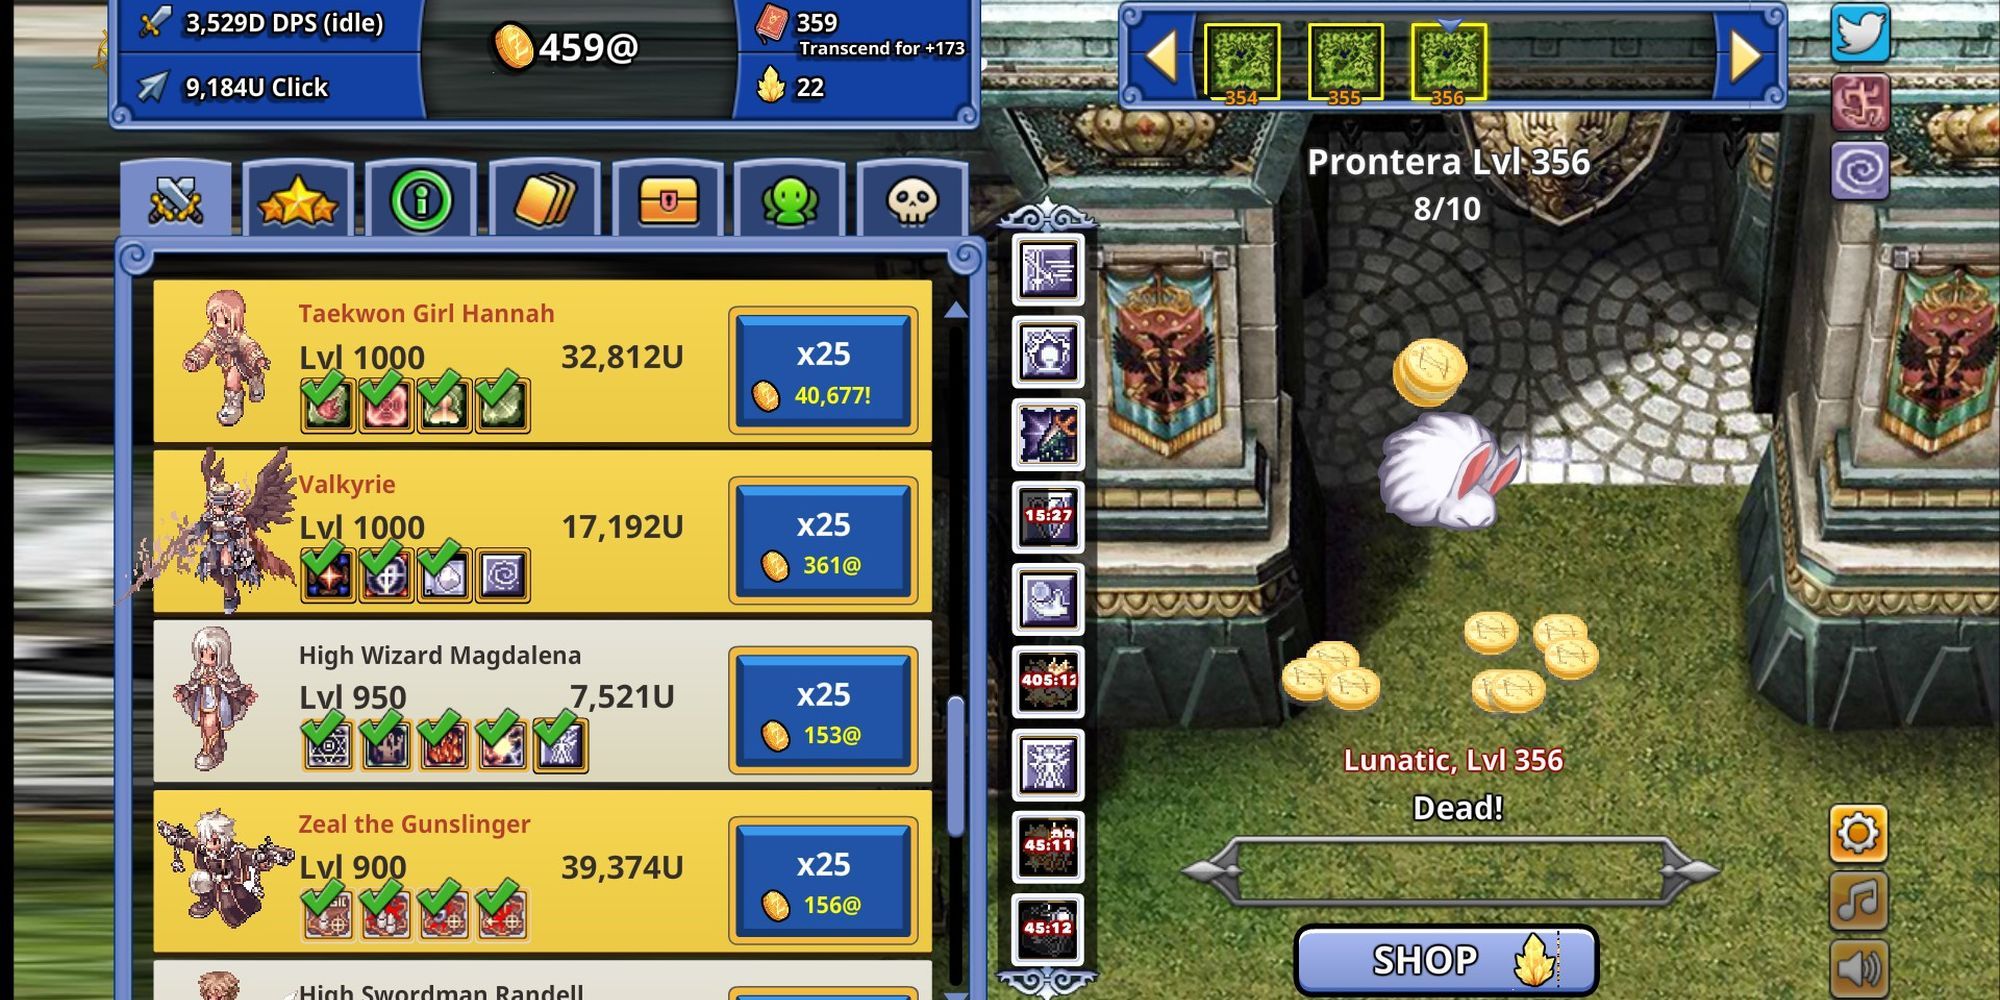 The main player interface in idle clicking game Ragnarok Clicker.